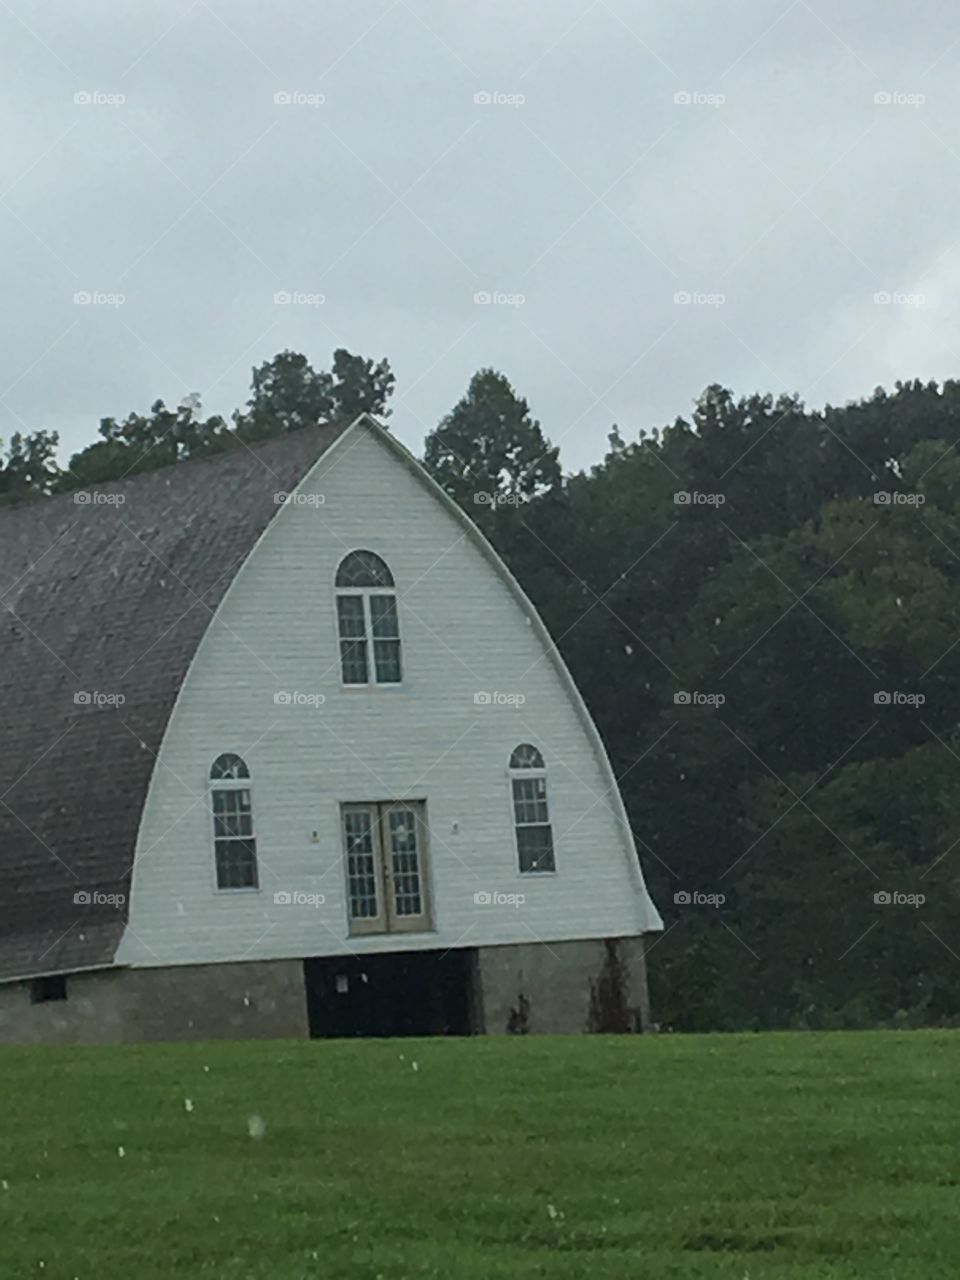 Barn turned into house